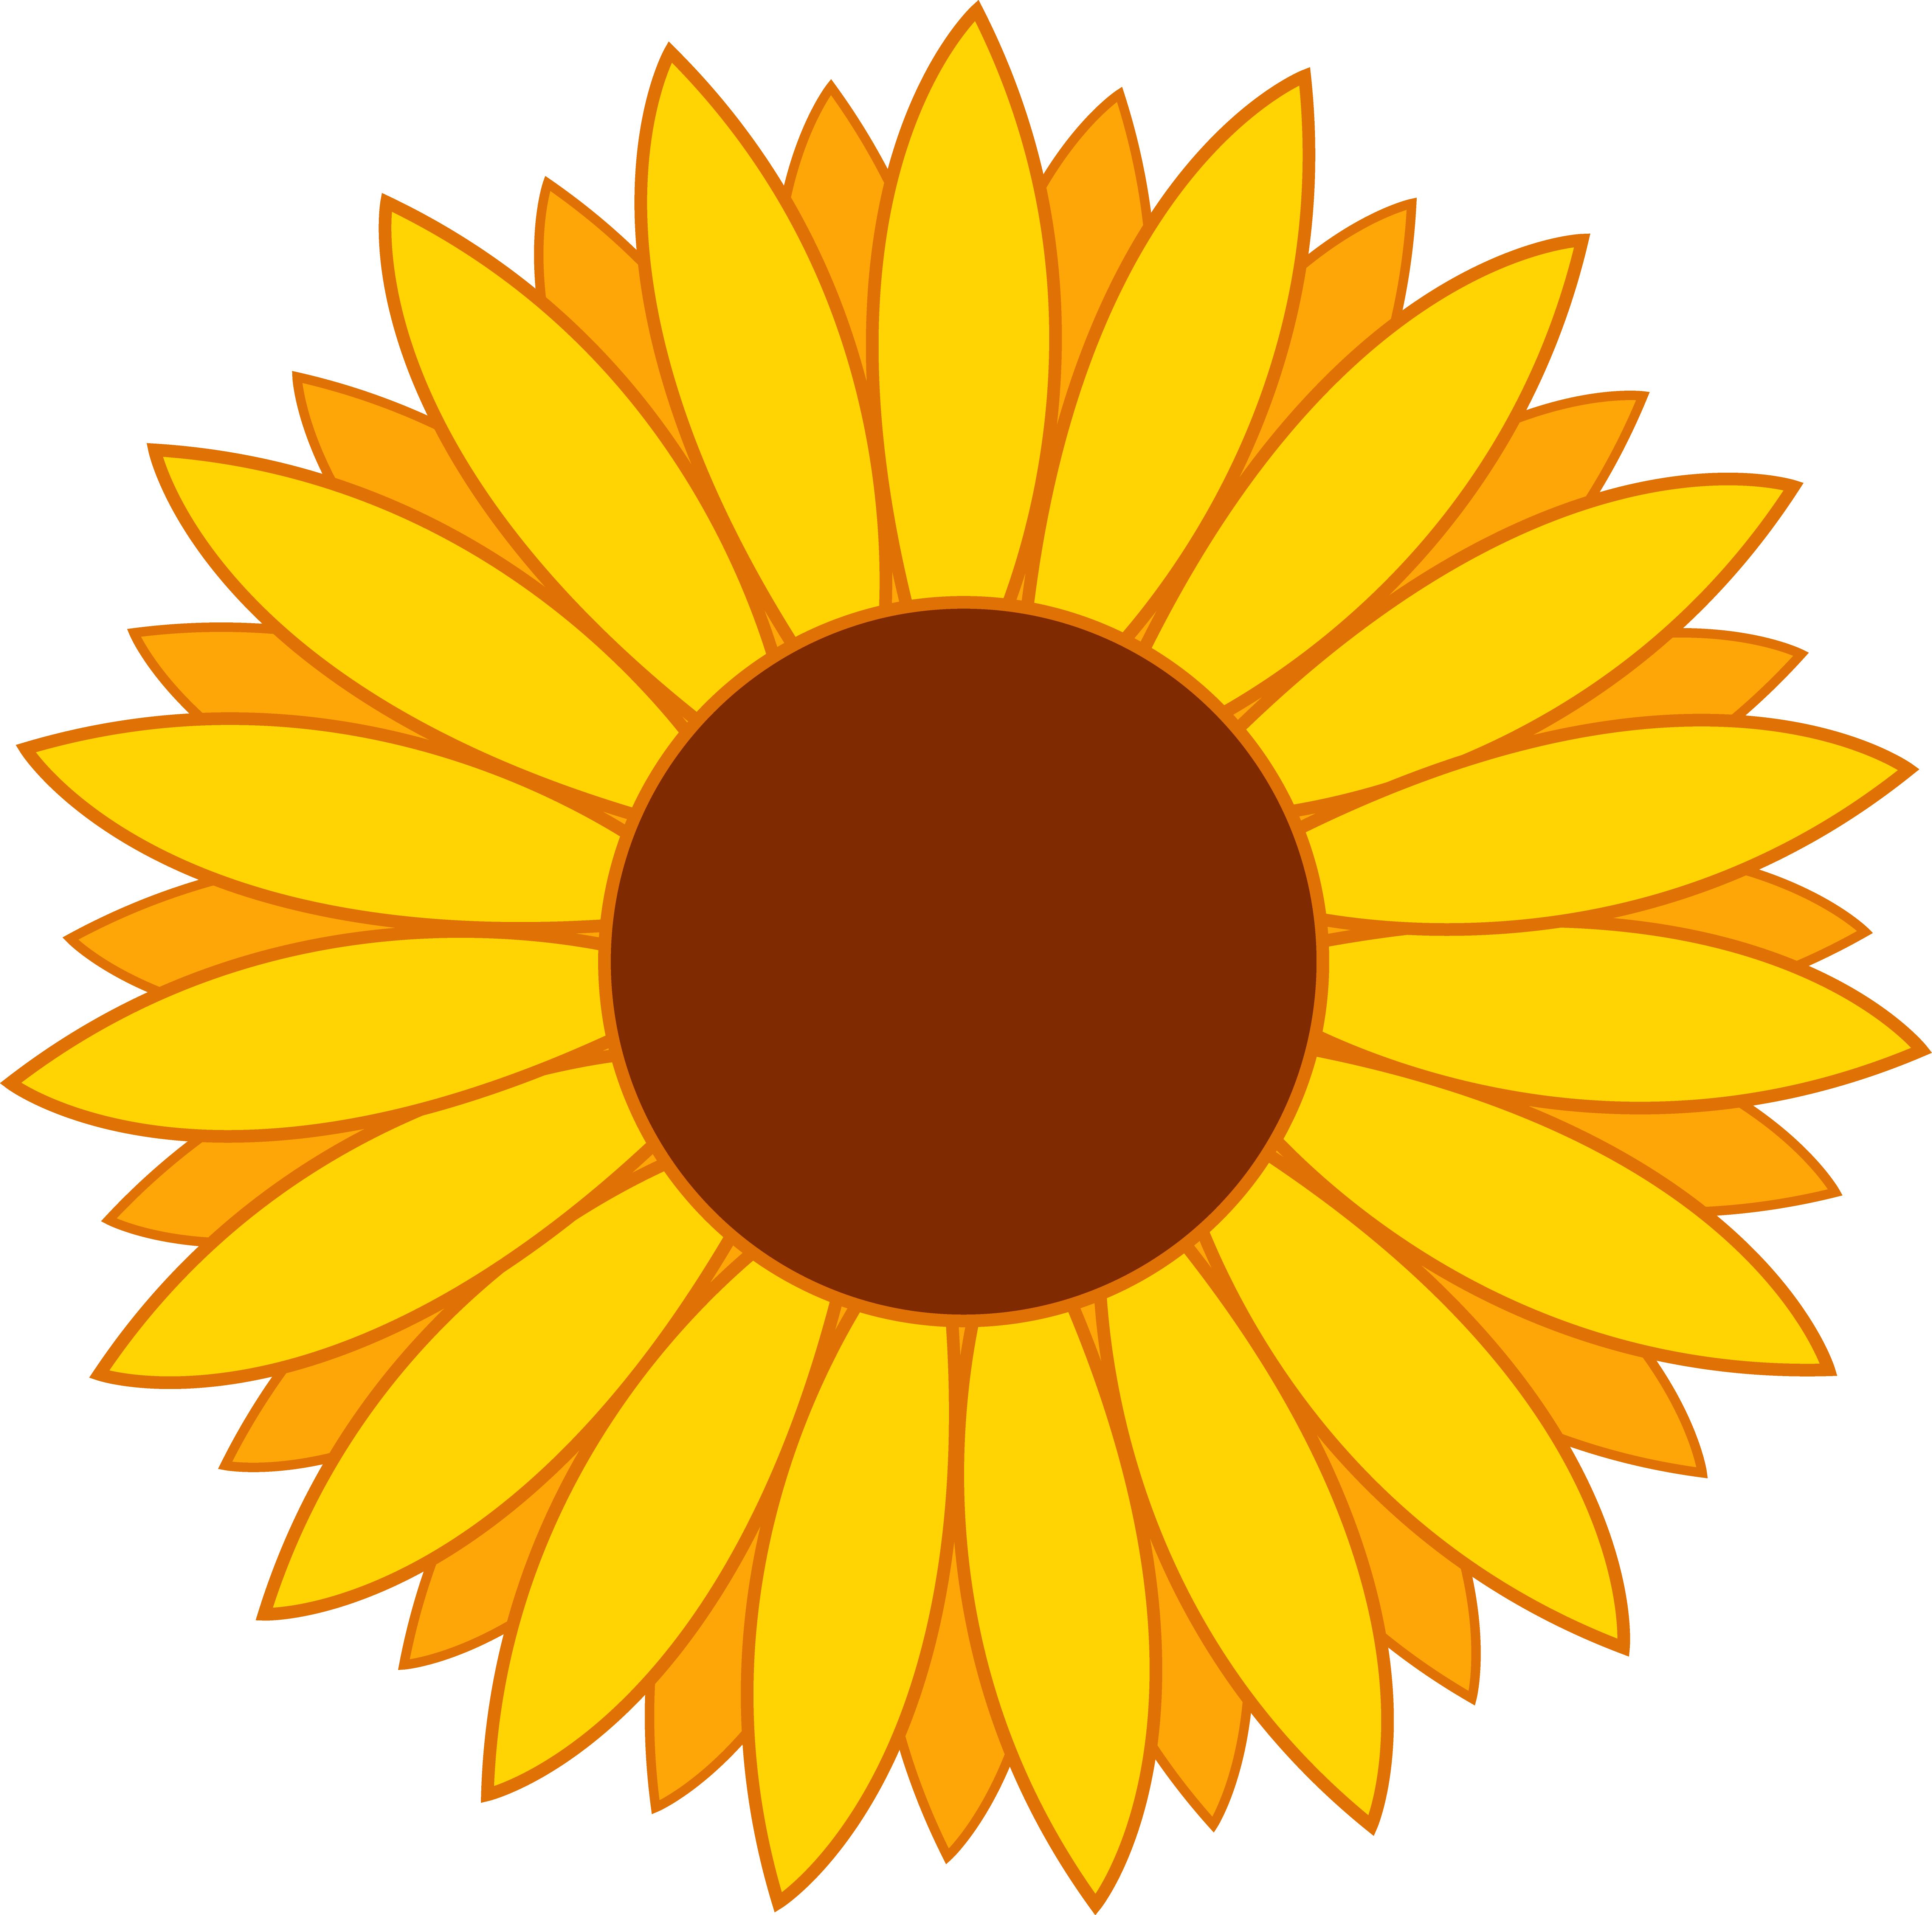 Sunflower Clip Art Image Free | Clipart library - Free Clipart Images